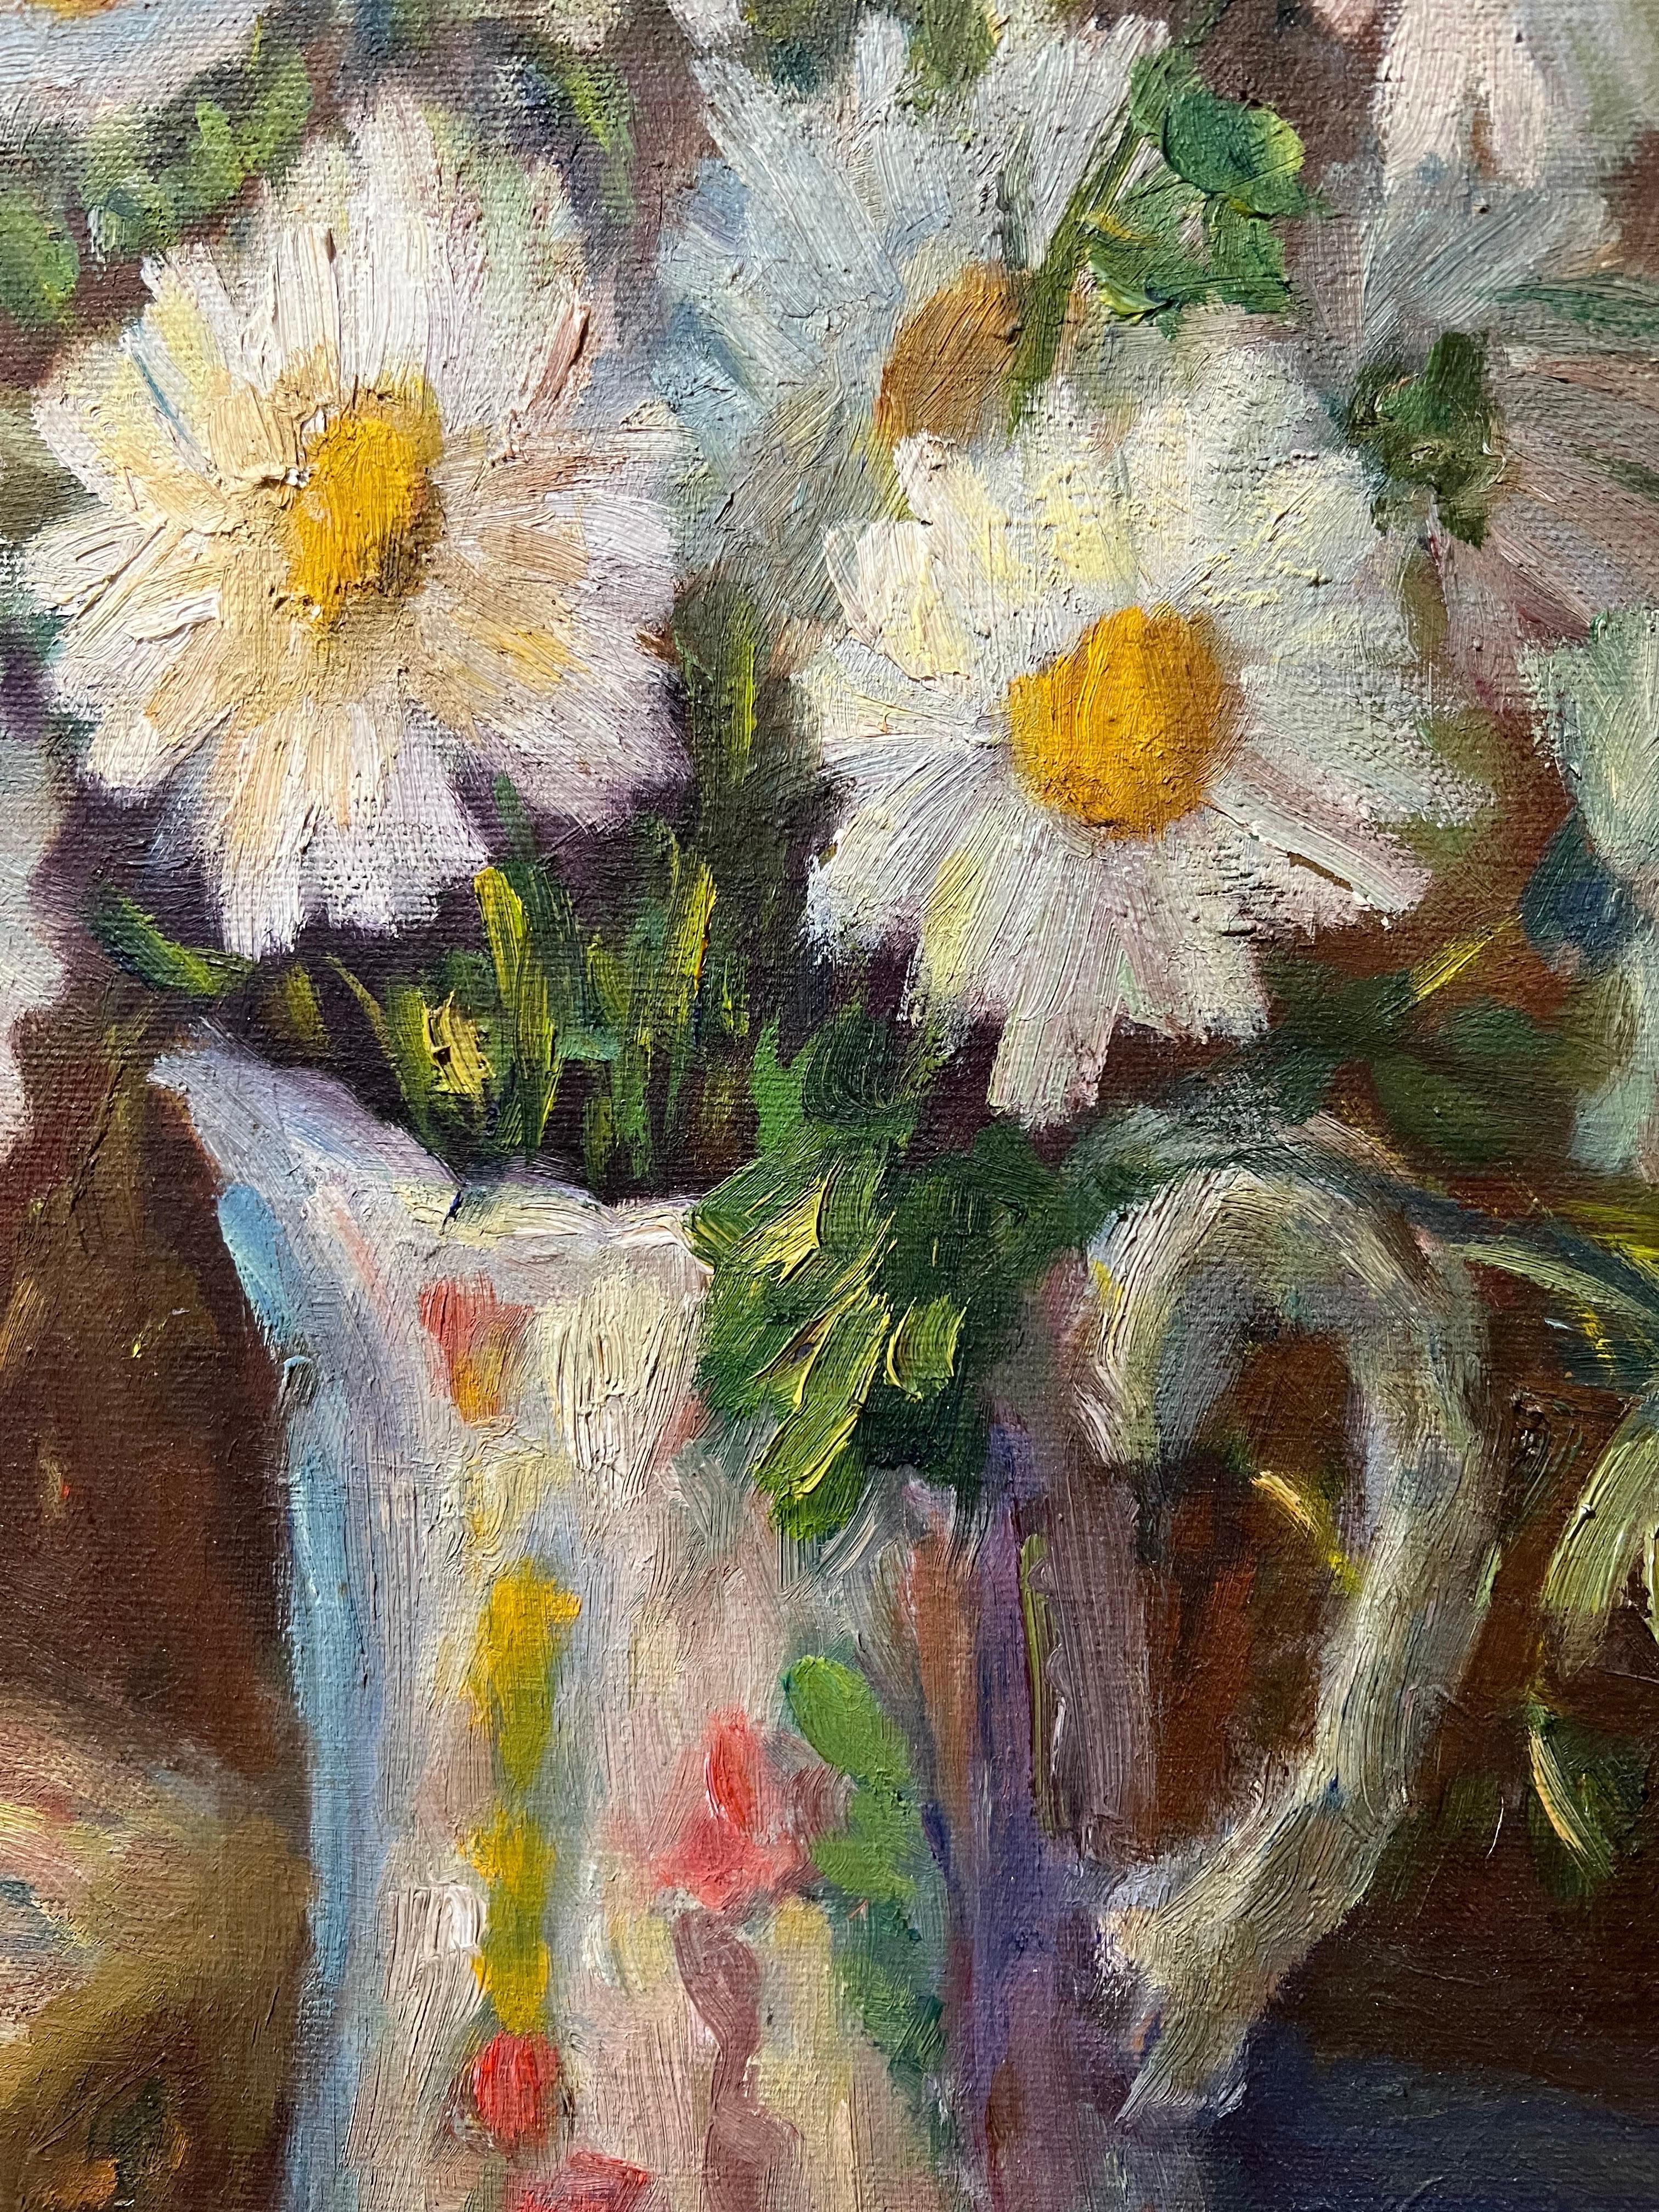 Impasto Impressionistic Painting of Daisies on the Style of Van Gogh For Sale 5